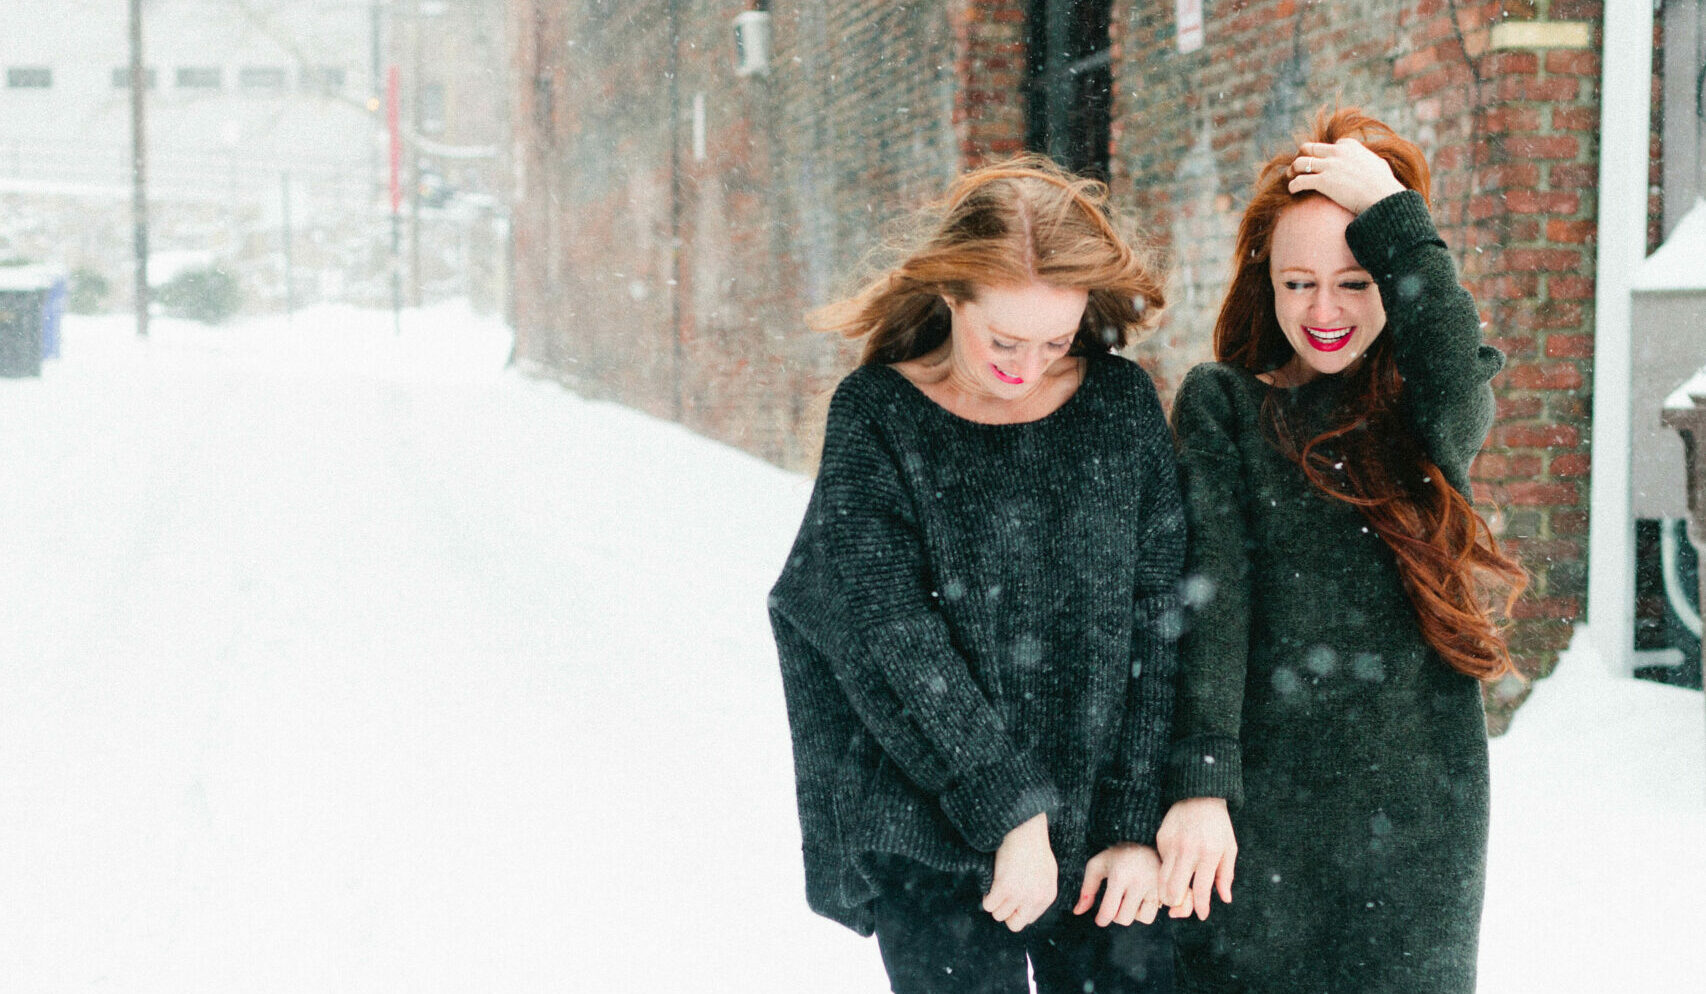 Redhead Skin Tips: How To Keep Your Hands and Feet Soft This Winter